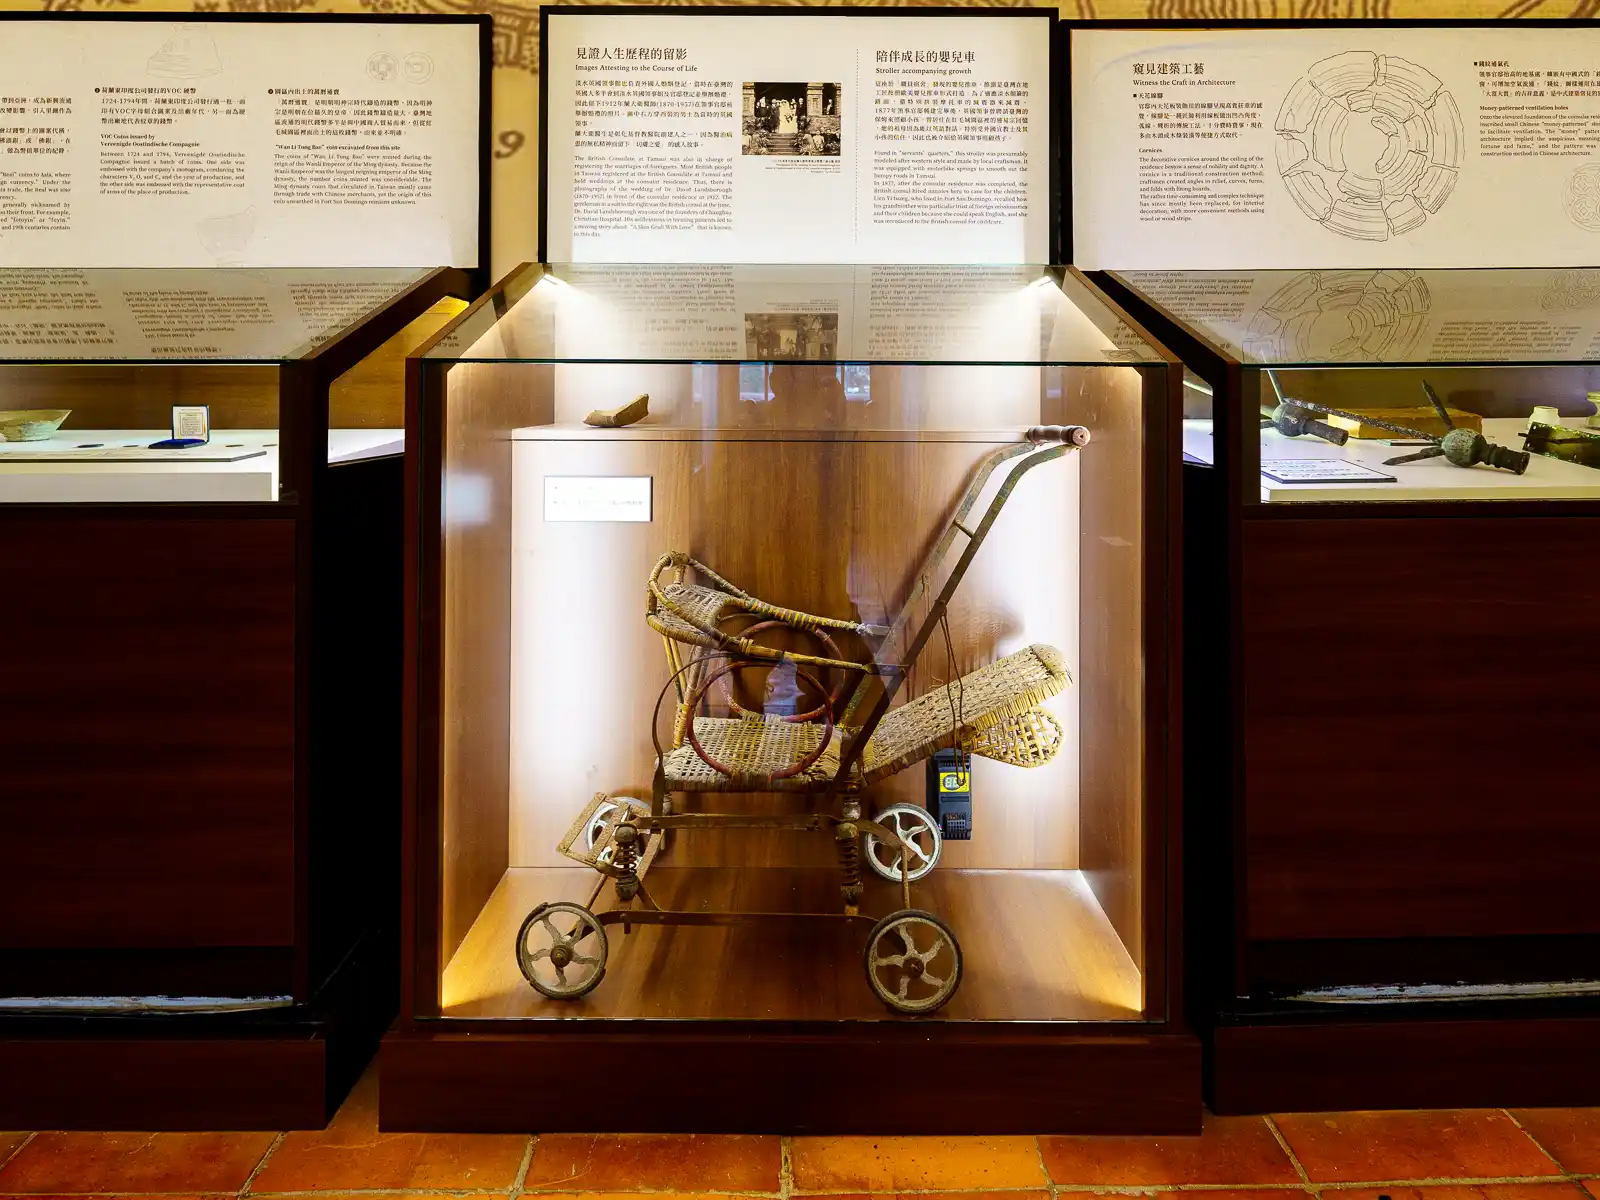 An antique stroller is on display.